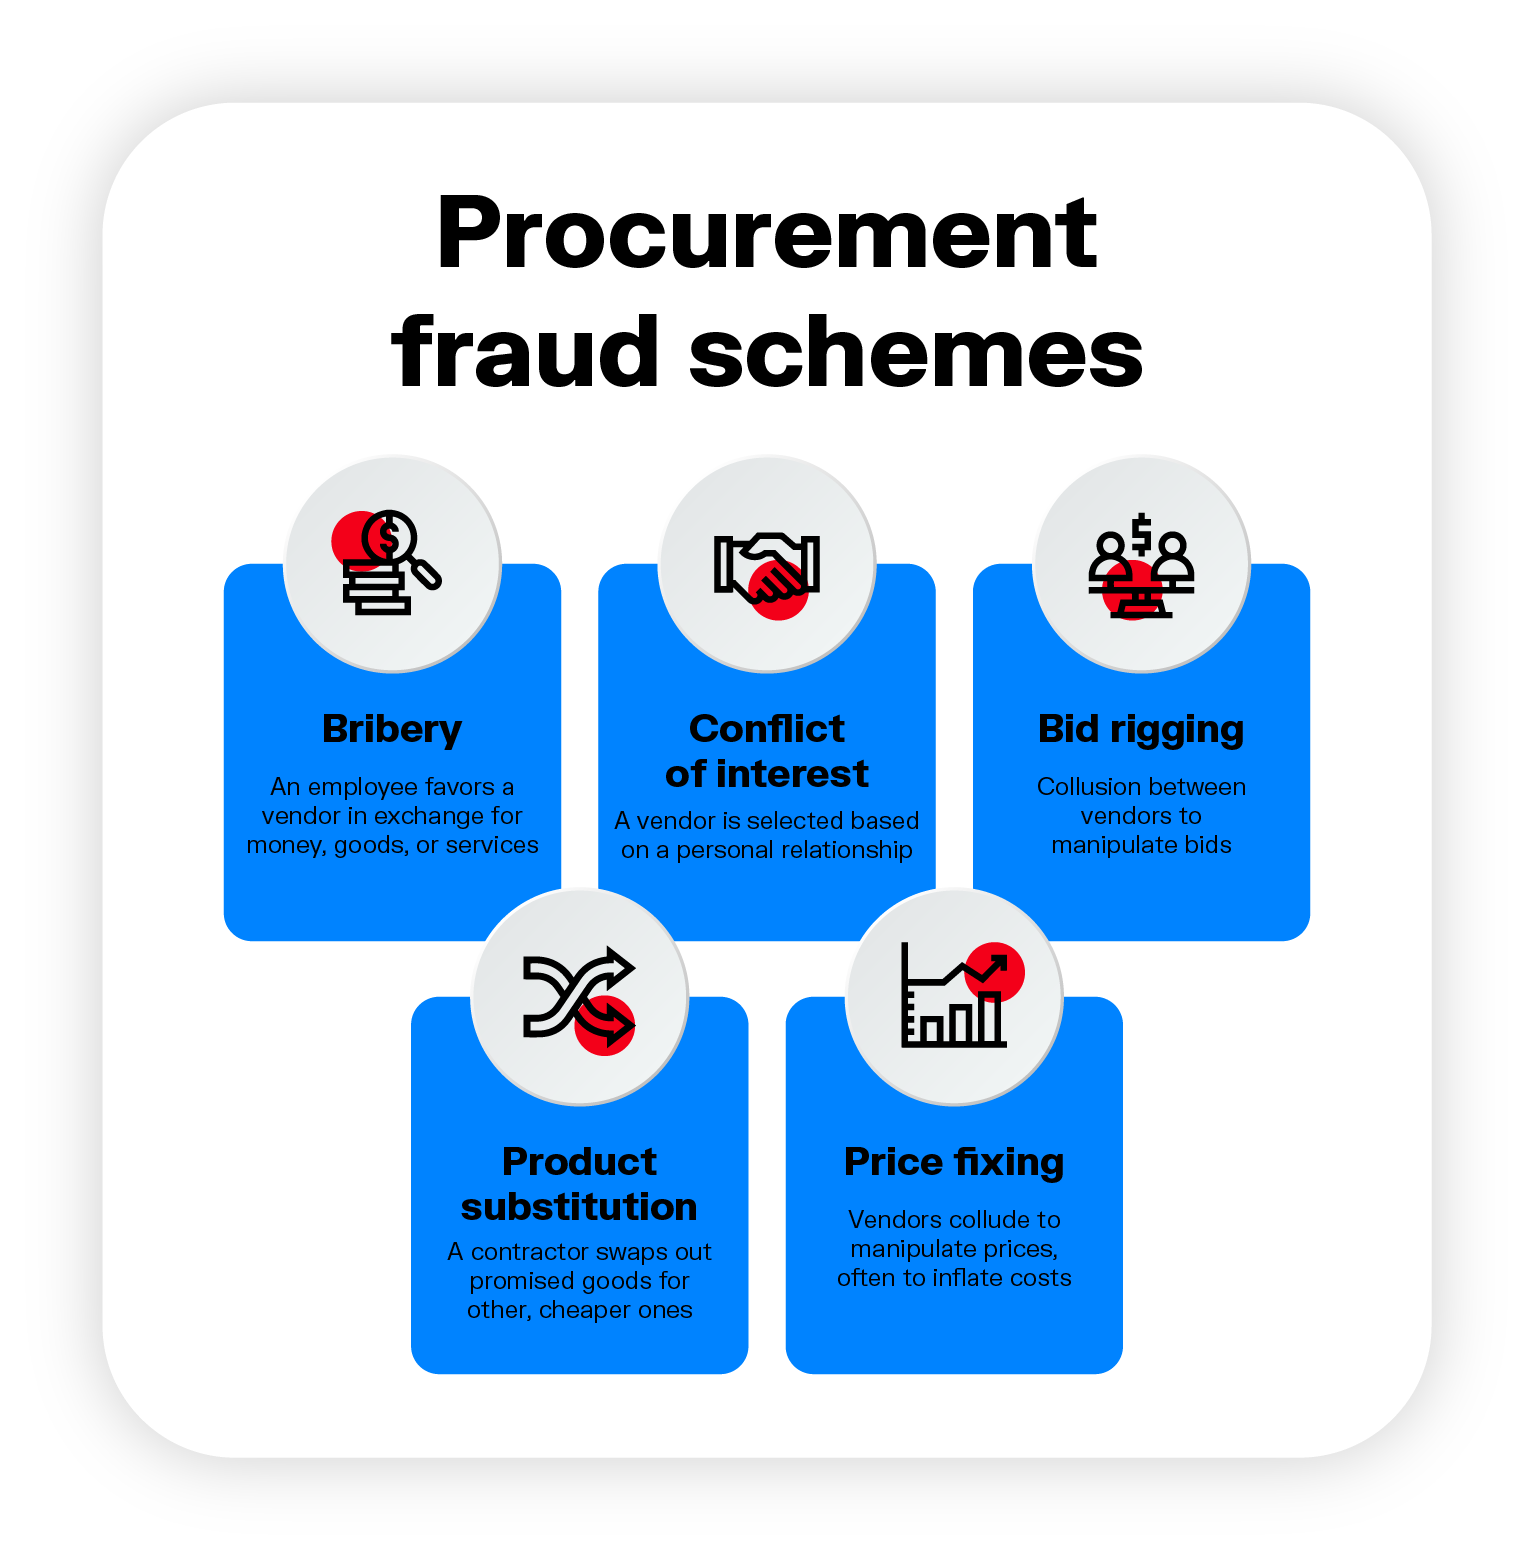 Infographic of some main procurement fraud schemes including bribery, conflict of interest, bid rigging, product substitution, price fixing